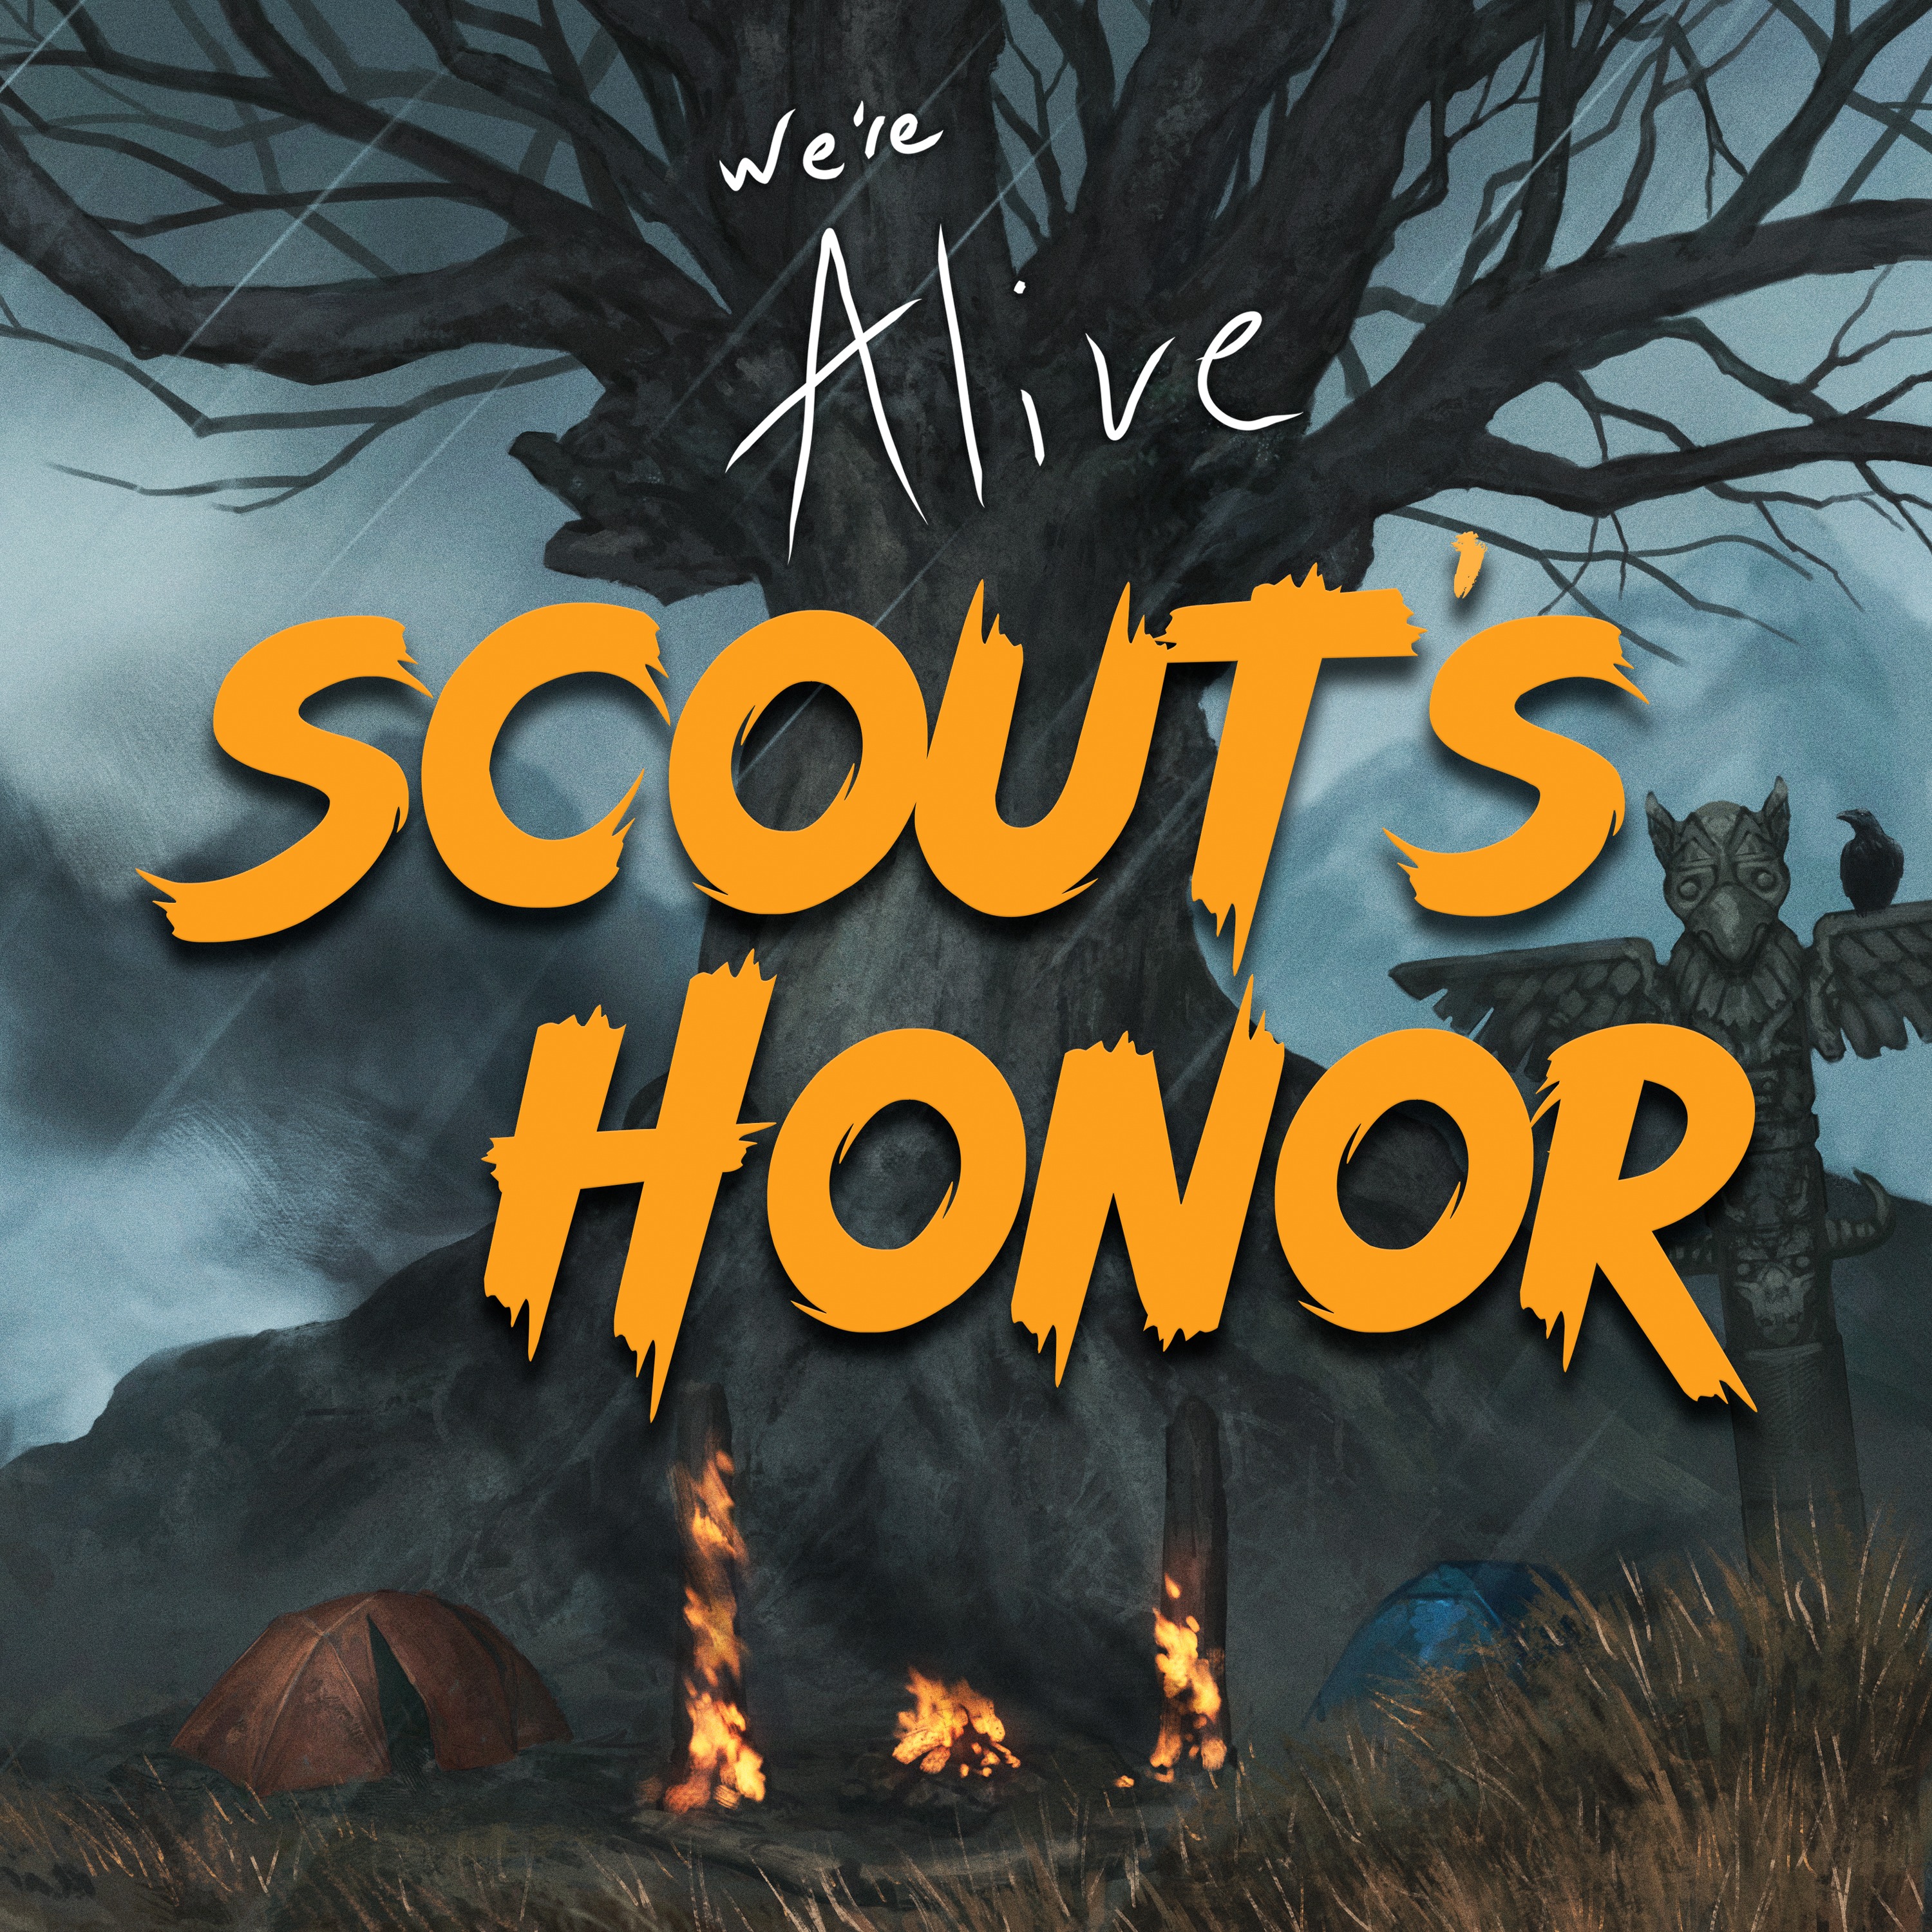 Announcing - We’re Alive: Scout’s Honor